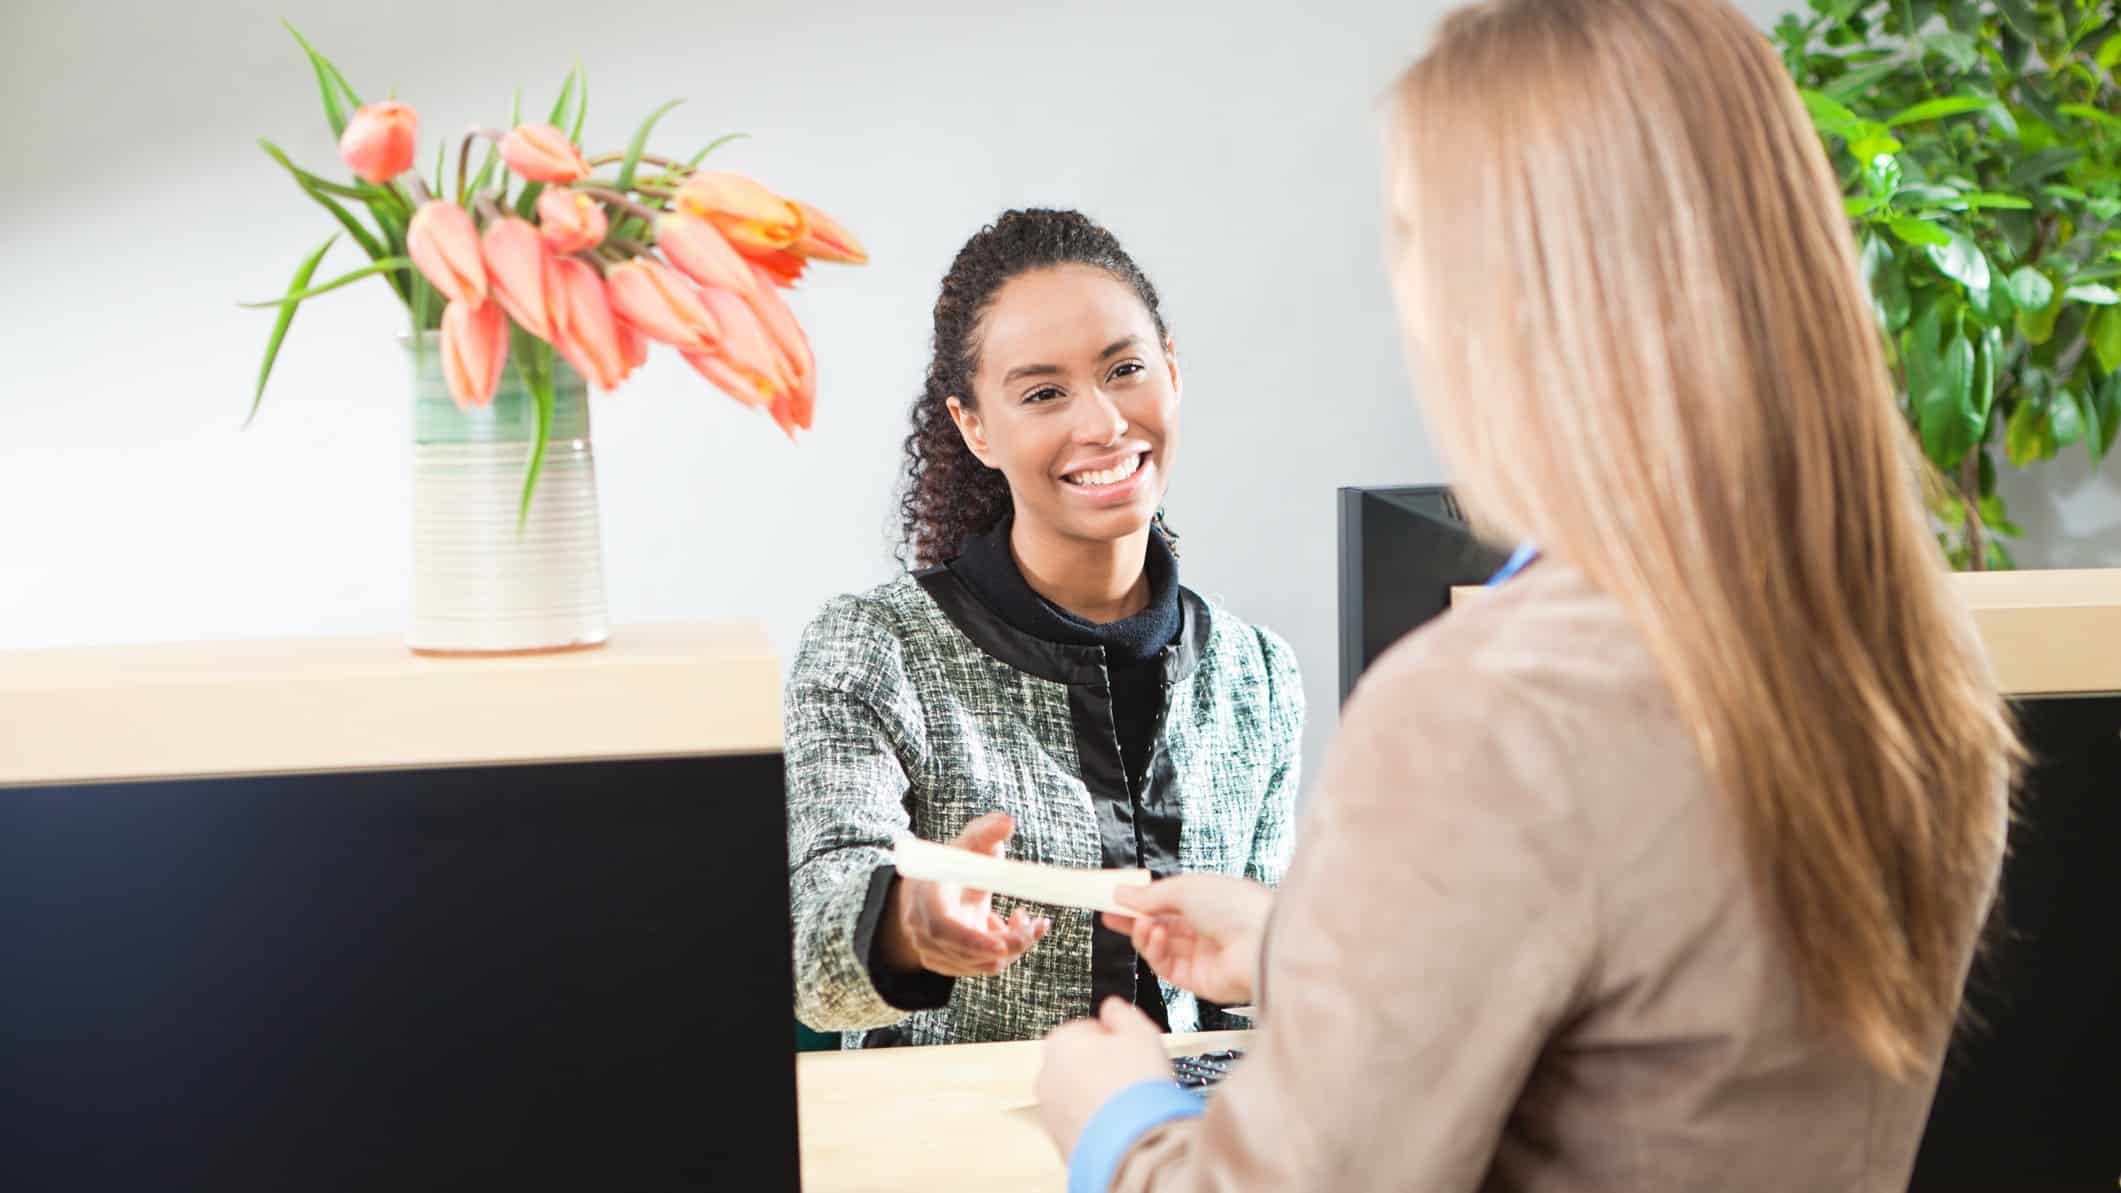 a female bank teller smiles warmly as she hands over a piece of paper to a female customer while a large vase of tulips rests on the bank counter.